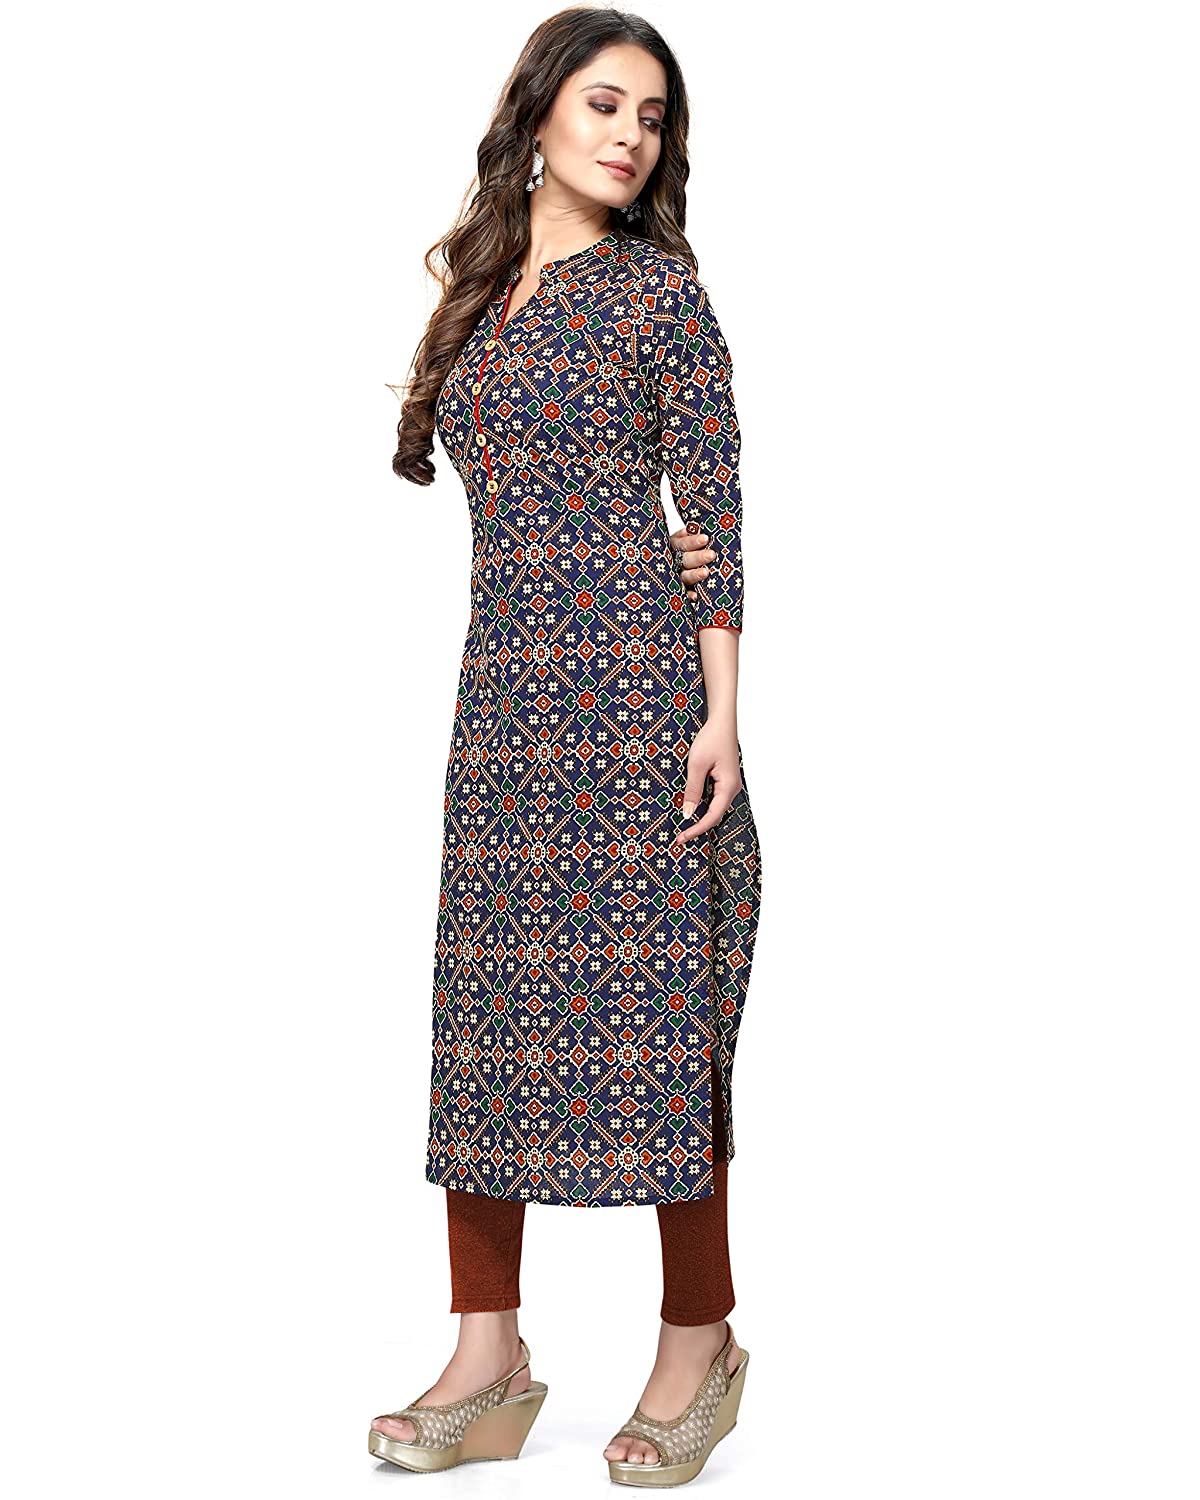 Women's Pure Cotton Jaipuri Printed Straight Kurti (Ready to Wear; Navy Blue and Red